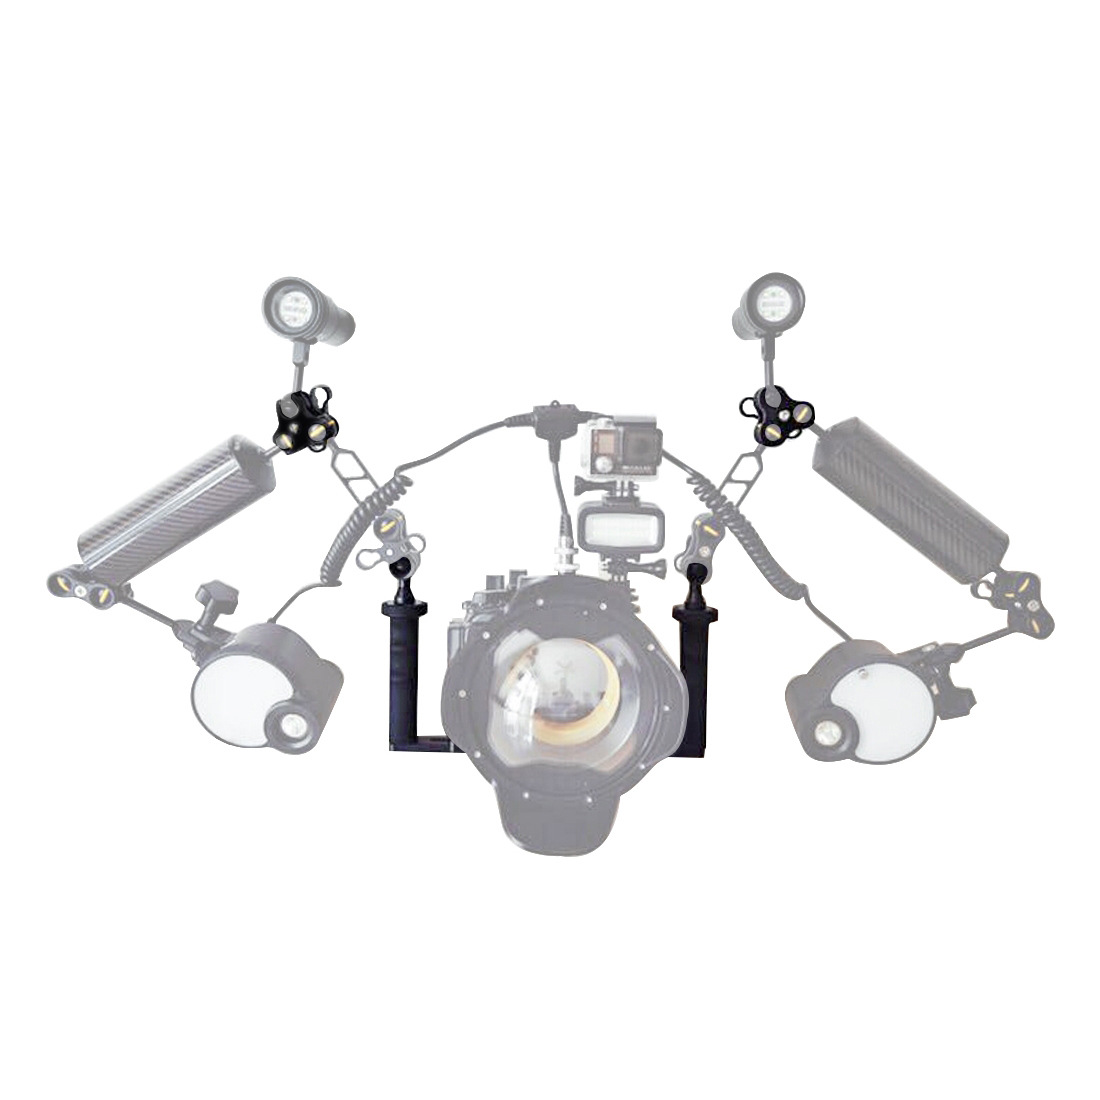 PULUZ-PU3040-Dual-Handle-Aluminium-Alloy-Tray-Stabilizer-with-Dual-Ball-Clamp-for-DSLR-Action-Camera-1578145